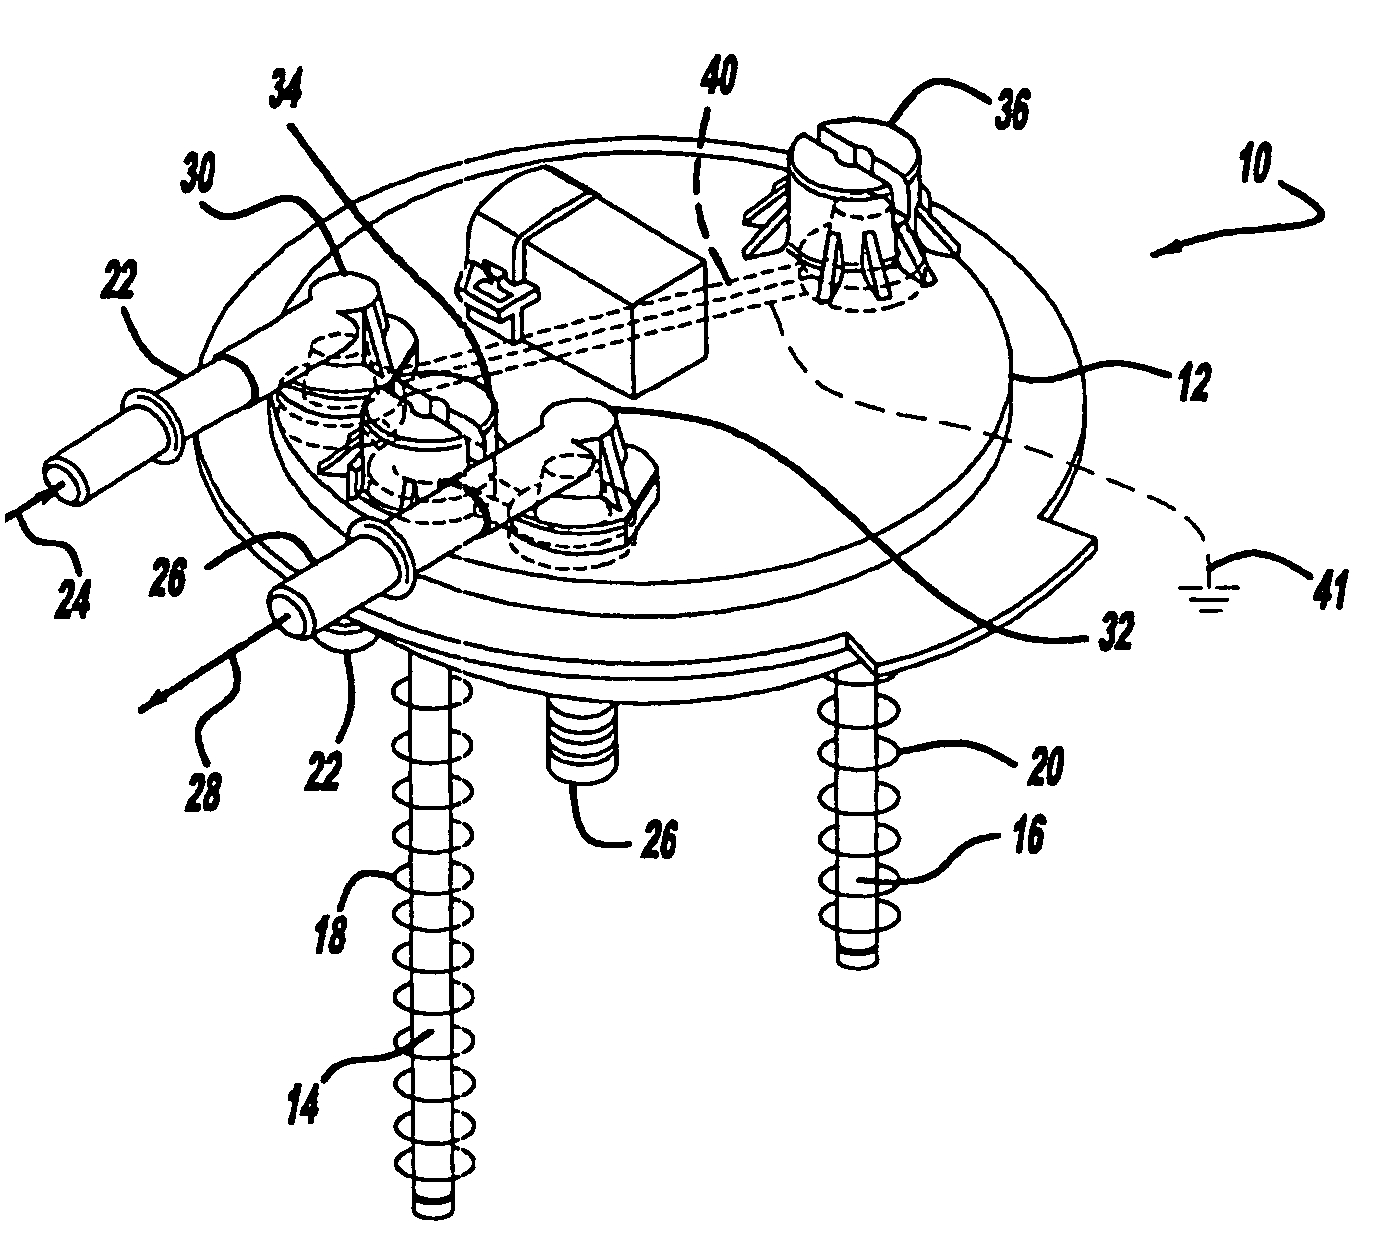 Multi-point grounding plate for fuel pump module